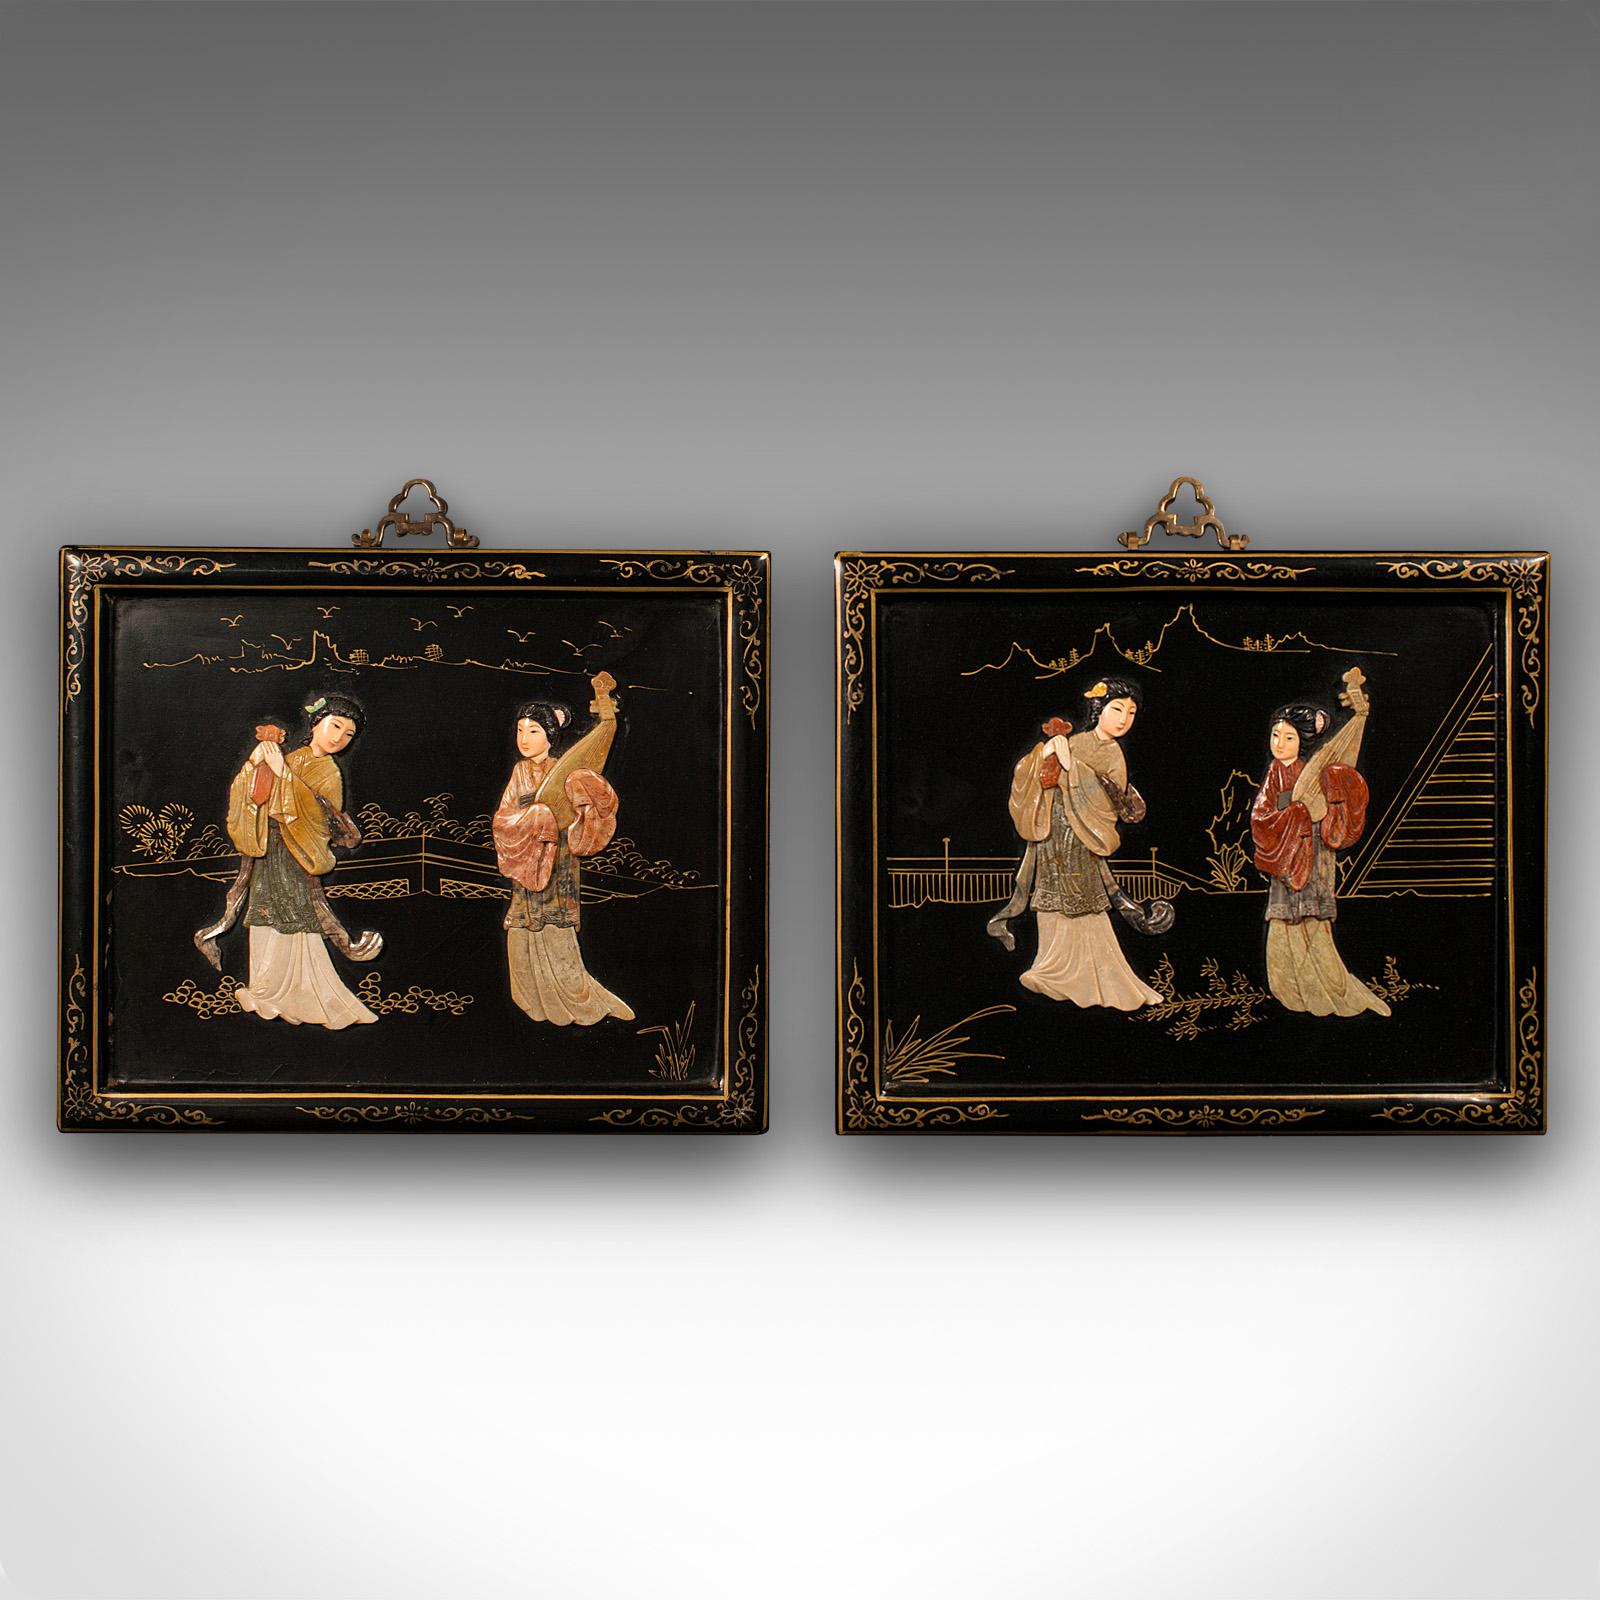 This is a pair of antique carved stone panels. A Japanese, lacquered decorative scene with female figures, dating to the late Victorian period, circa 1900.

Appealing Japanned decor with distinctive finish
Displays a desirable aged patina